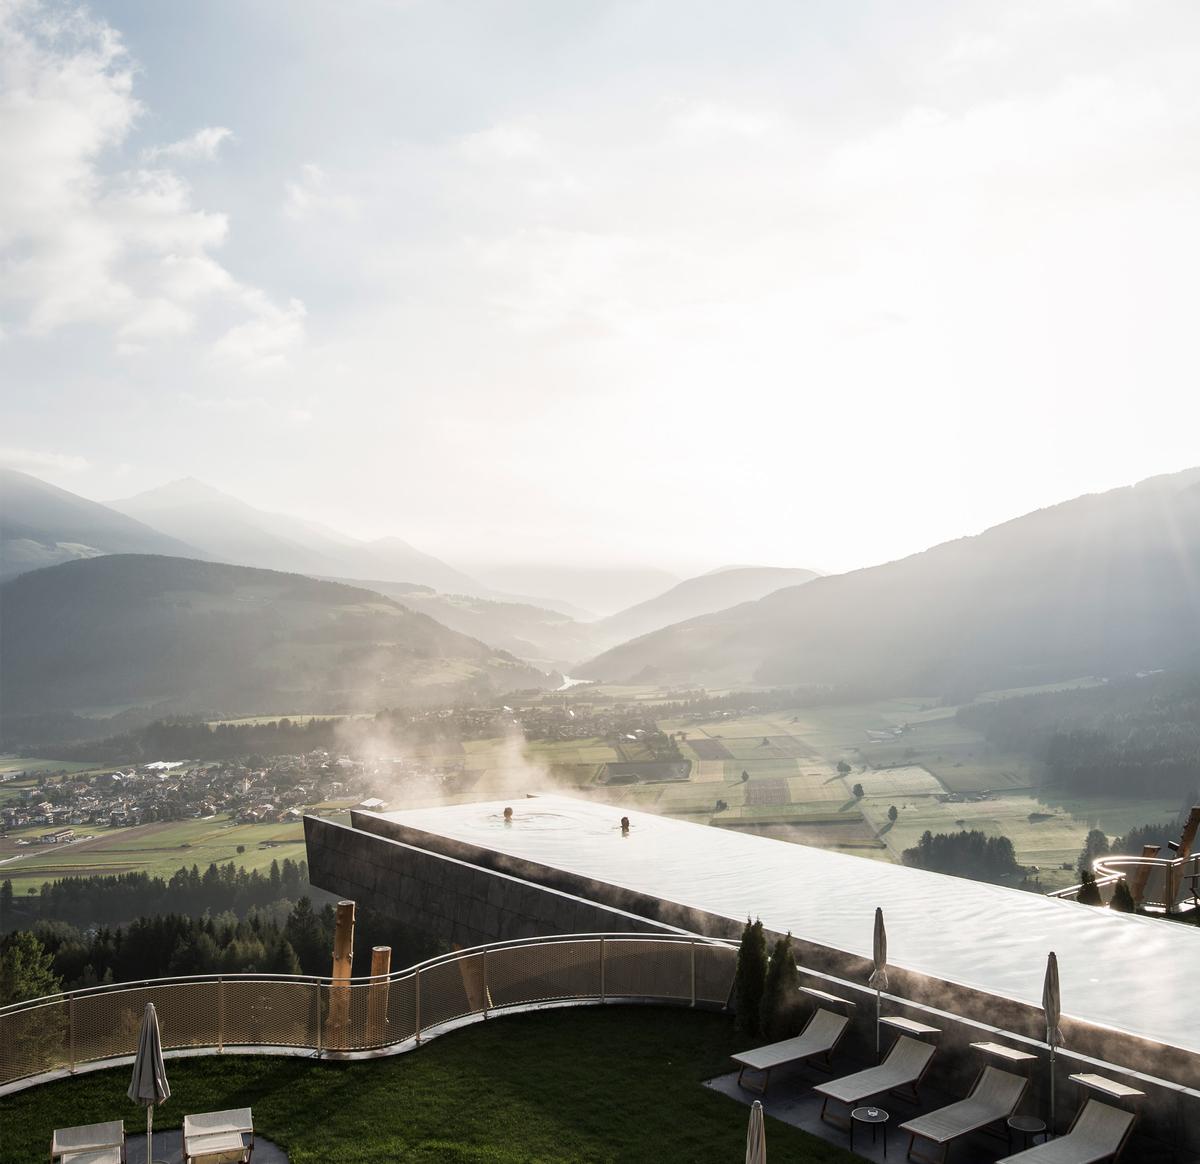 The dramatic pool, situated at an altitude of 1,350m, rests between the old and new wings of the Hotel Hubertus / NOA*